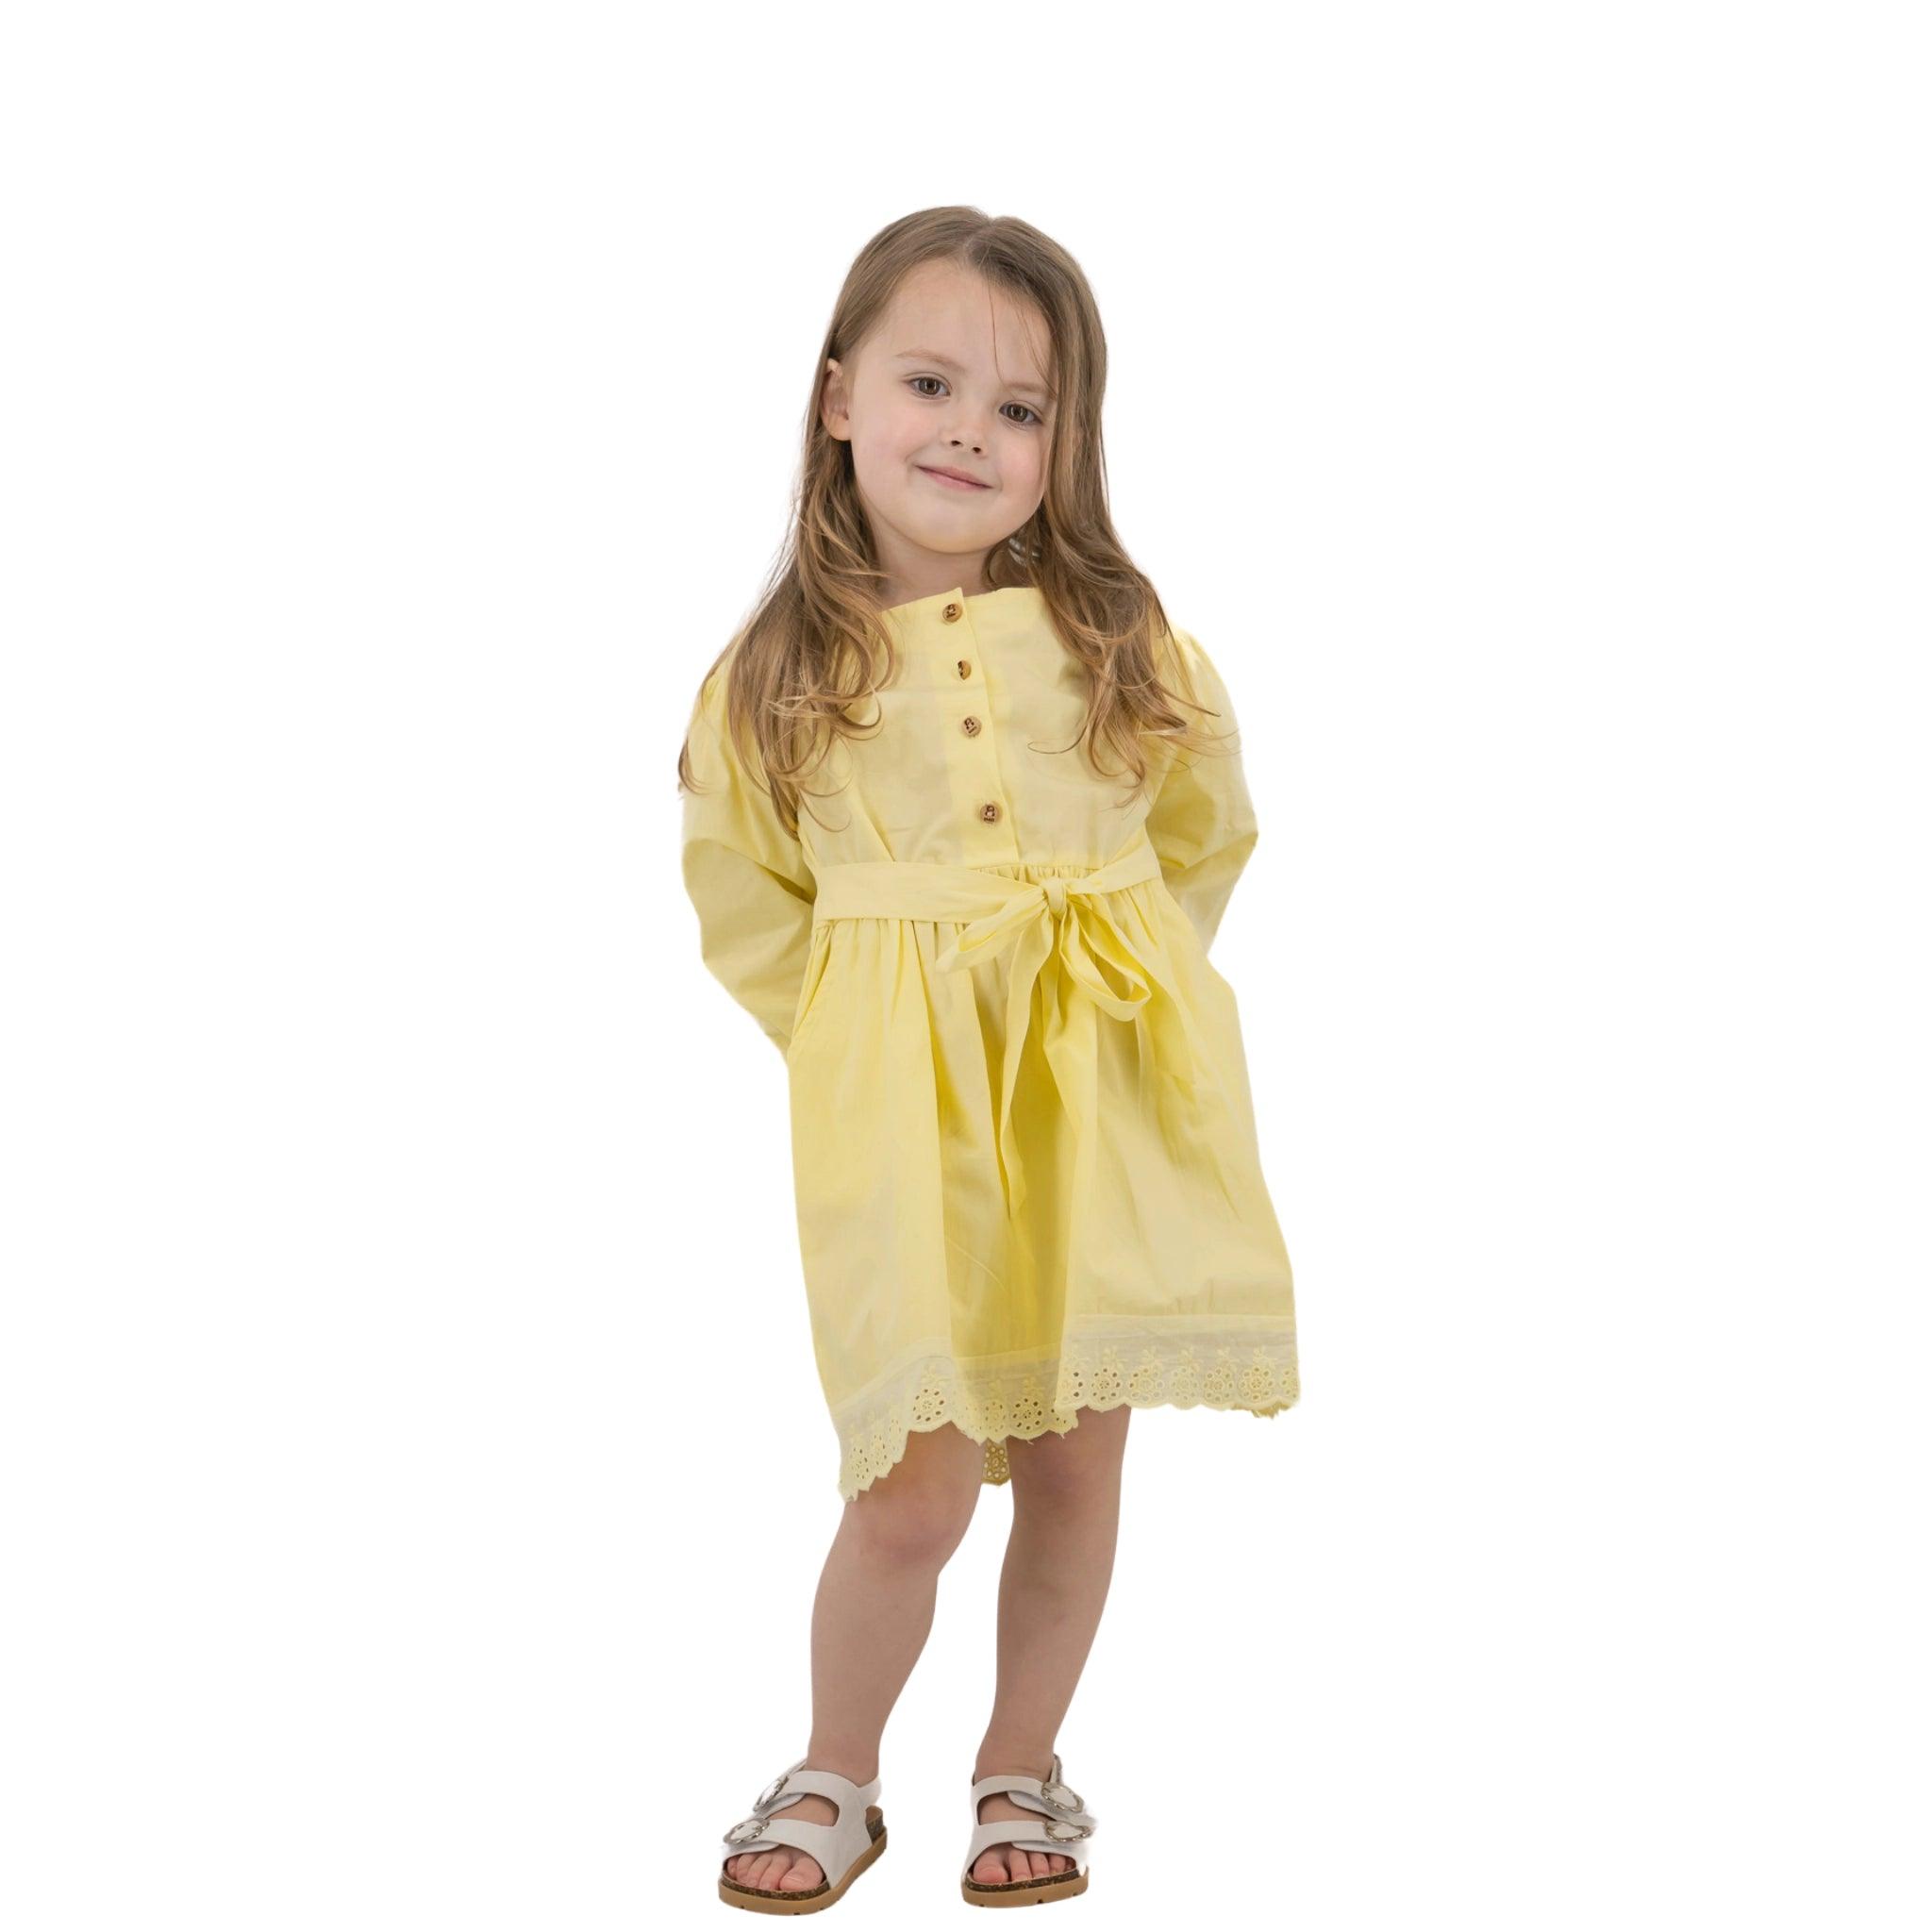 A young girl with long hair in a Karee Yellow Long Puff Sleeve Cotton Dress and sandals, standing and smiling against a white background.